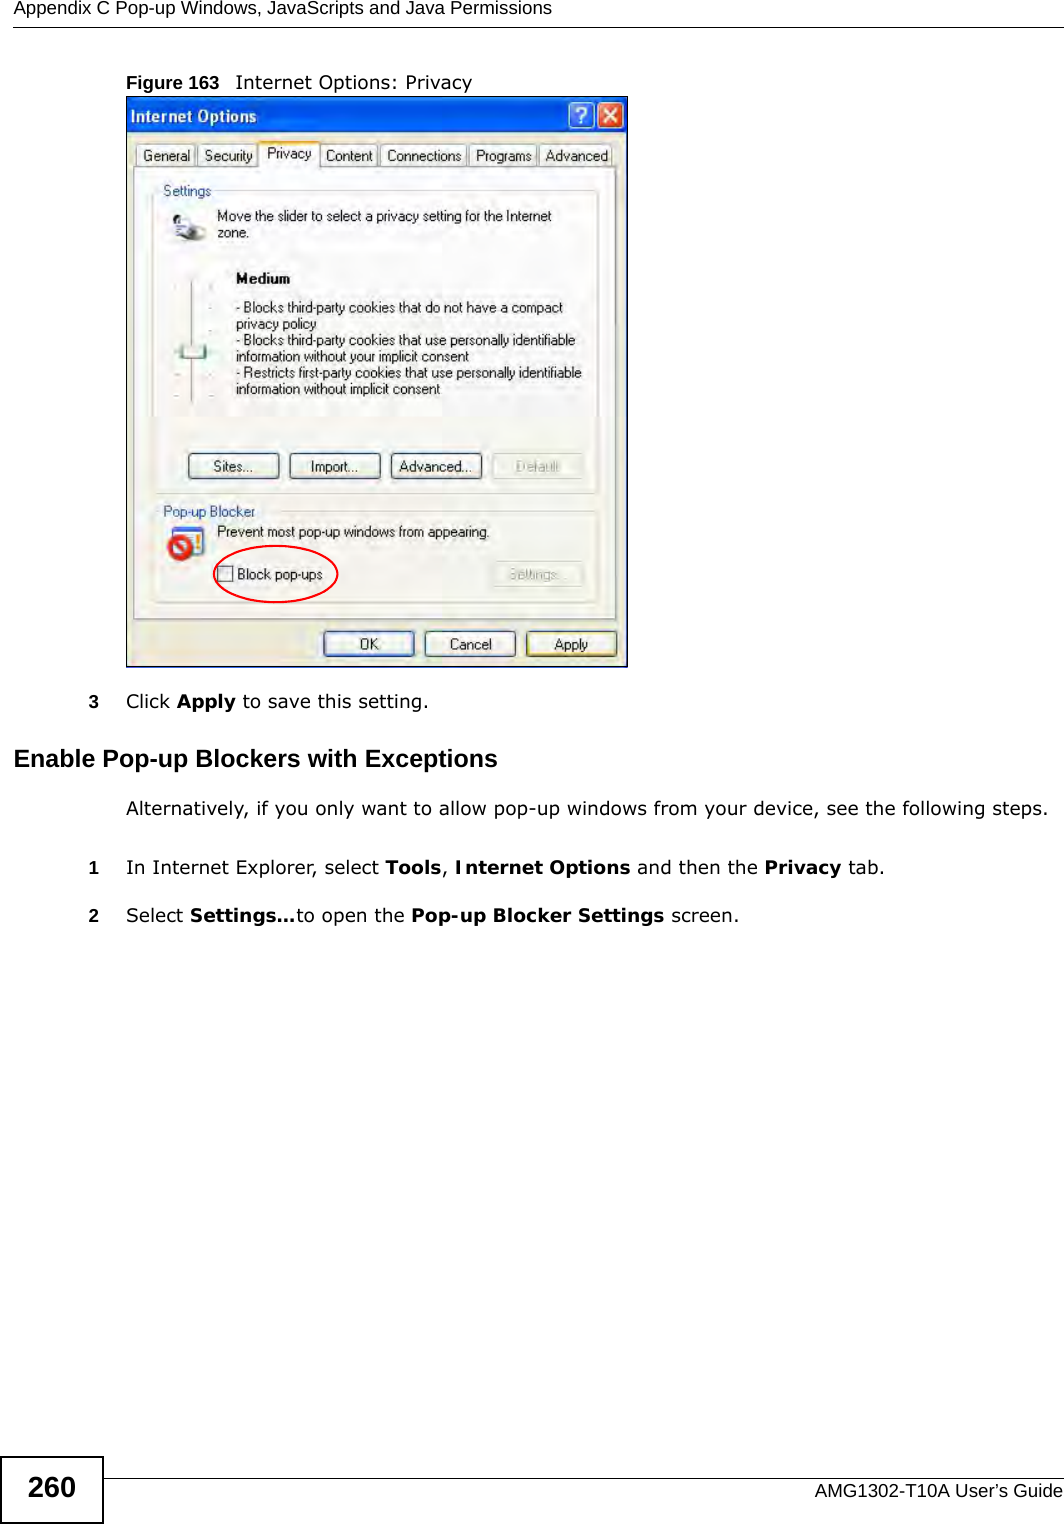 Appendix C Pop-up Windows, JavaScripts and Java PermissionsAMG1302-T10A User’s Guide260Figure 163   Internet Options: Privacy3Click Apply to save this setting.Enable Pop-up Blockers with ExceptionsAlternatively, if you only want to allow pop-up windows from your device, see the following steps.1In Internet Explorer, select Tools, Internet Options and then the Privacy tab. 2Select Settings…to open the Pop-up Blocker Settings screen.